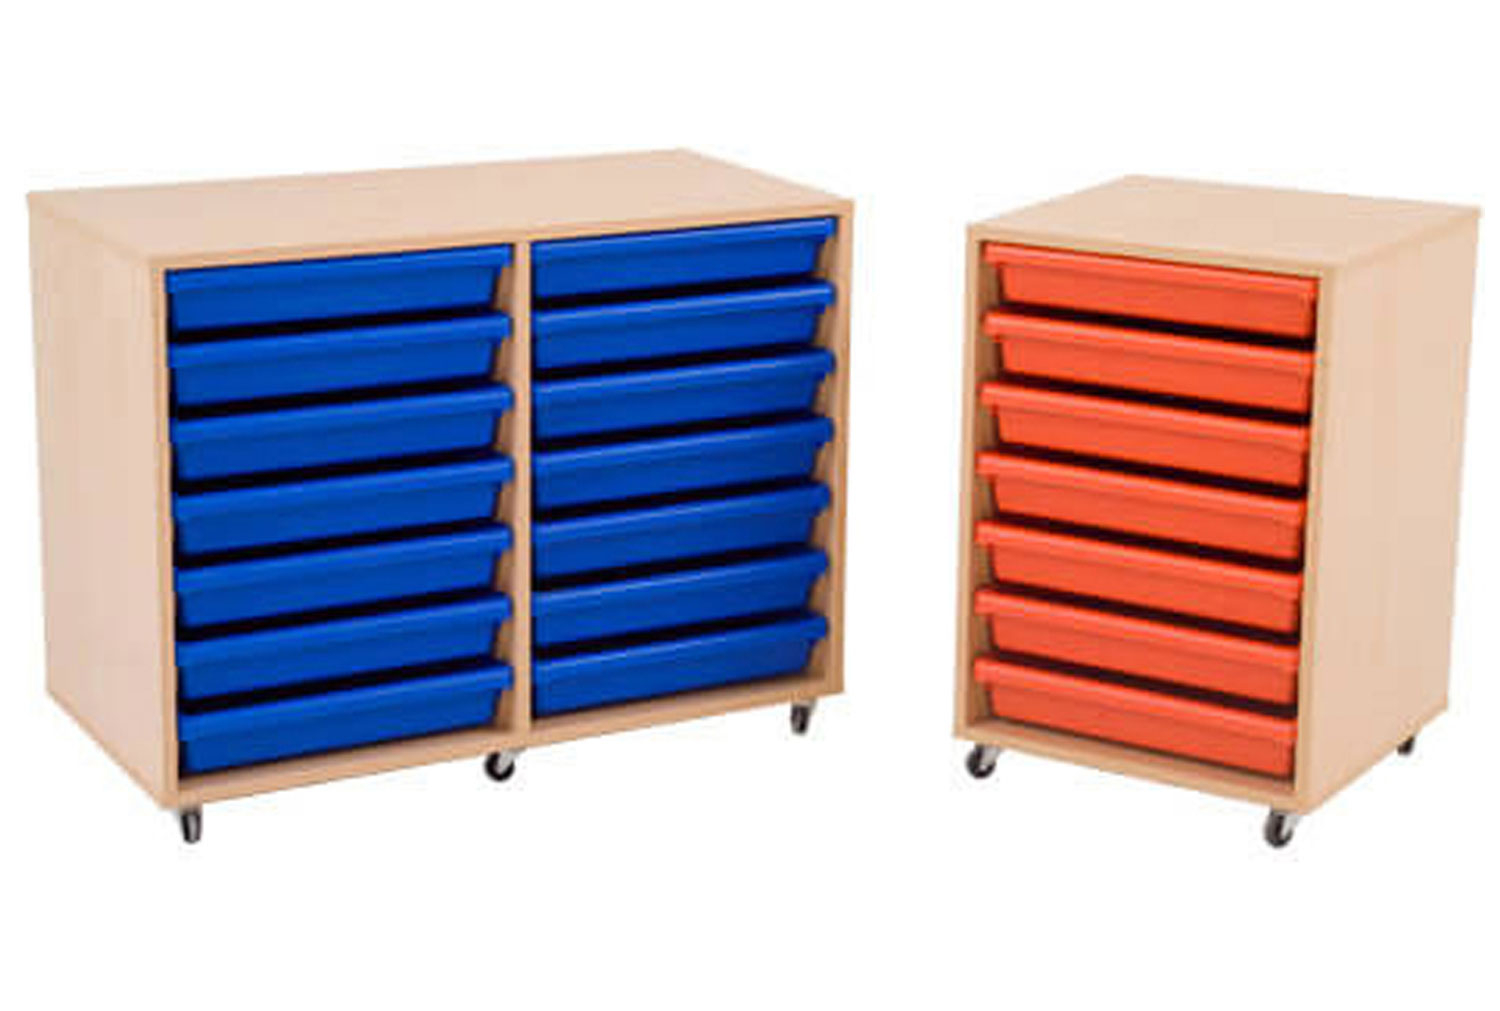 Mobile Classroom Storage Unit With A3 Gratnells Trays, Single Unit (500wx500dx754h), Blue Trays, Express Delivery